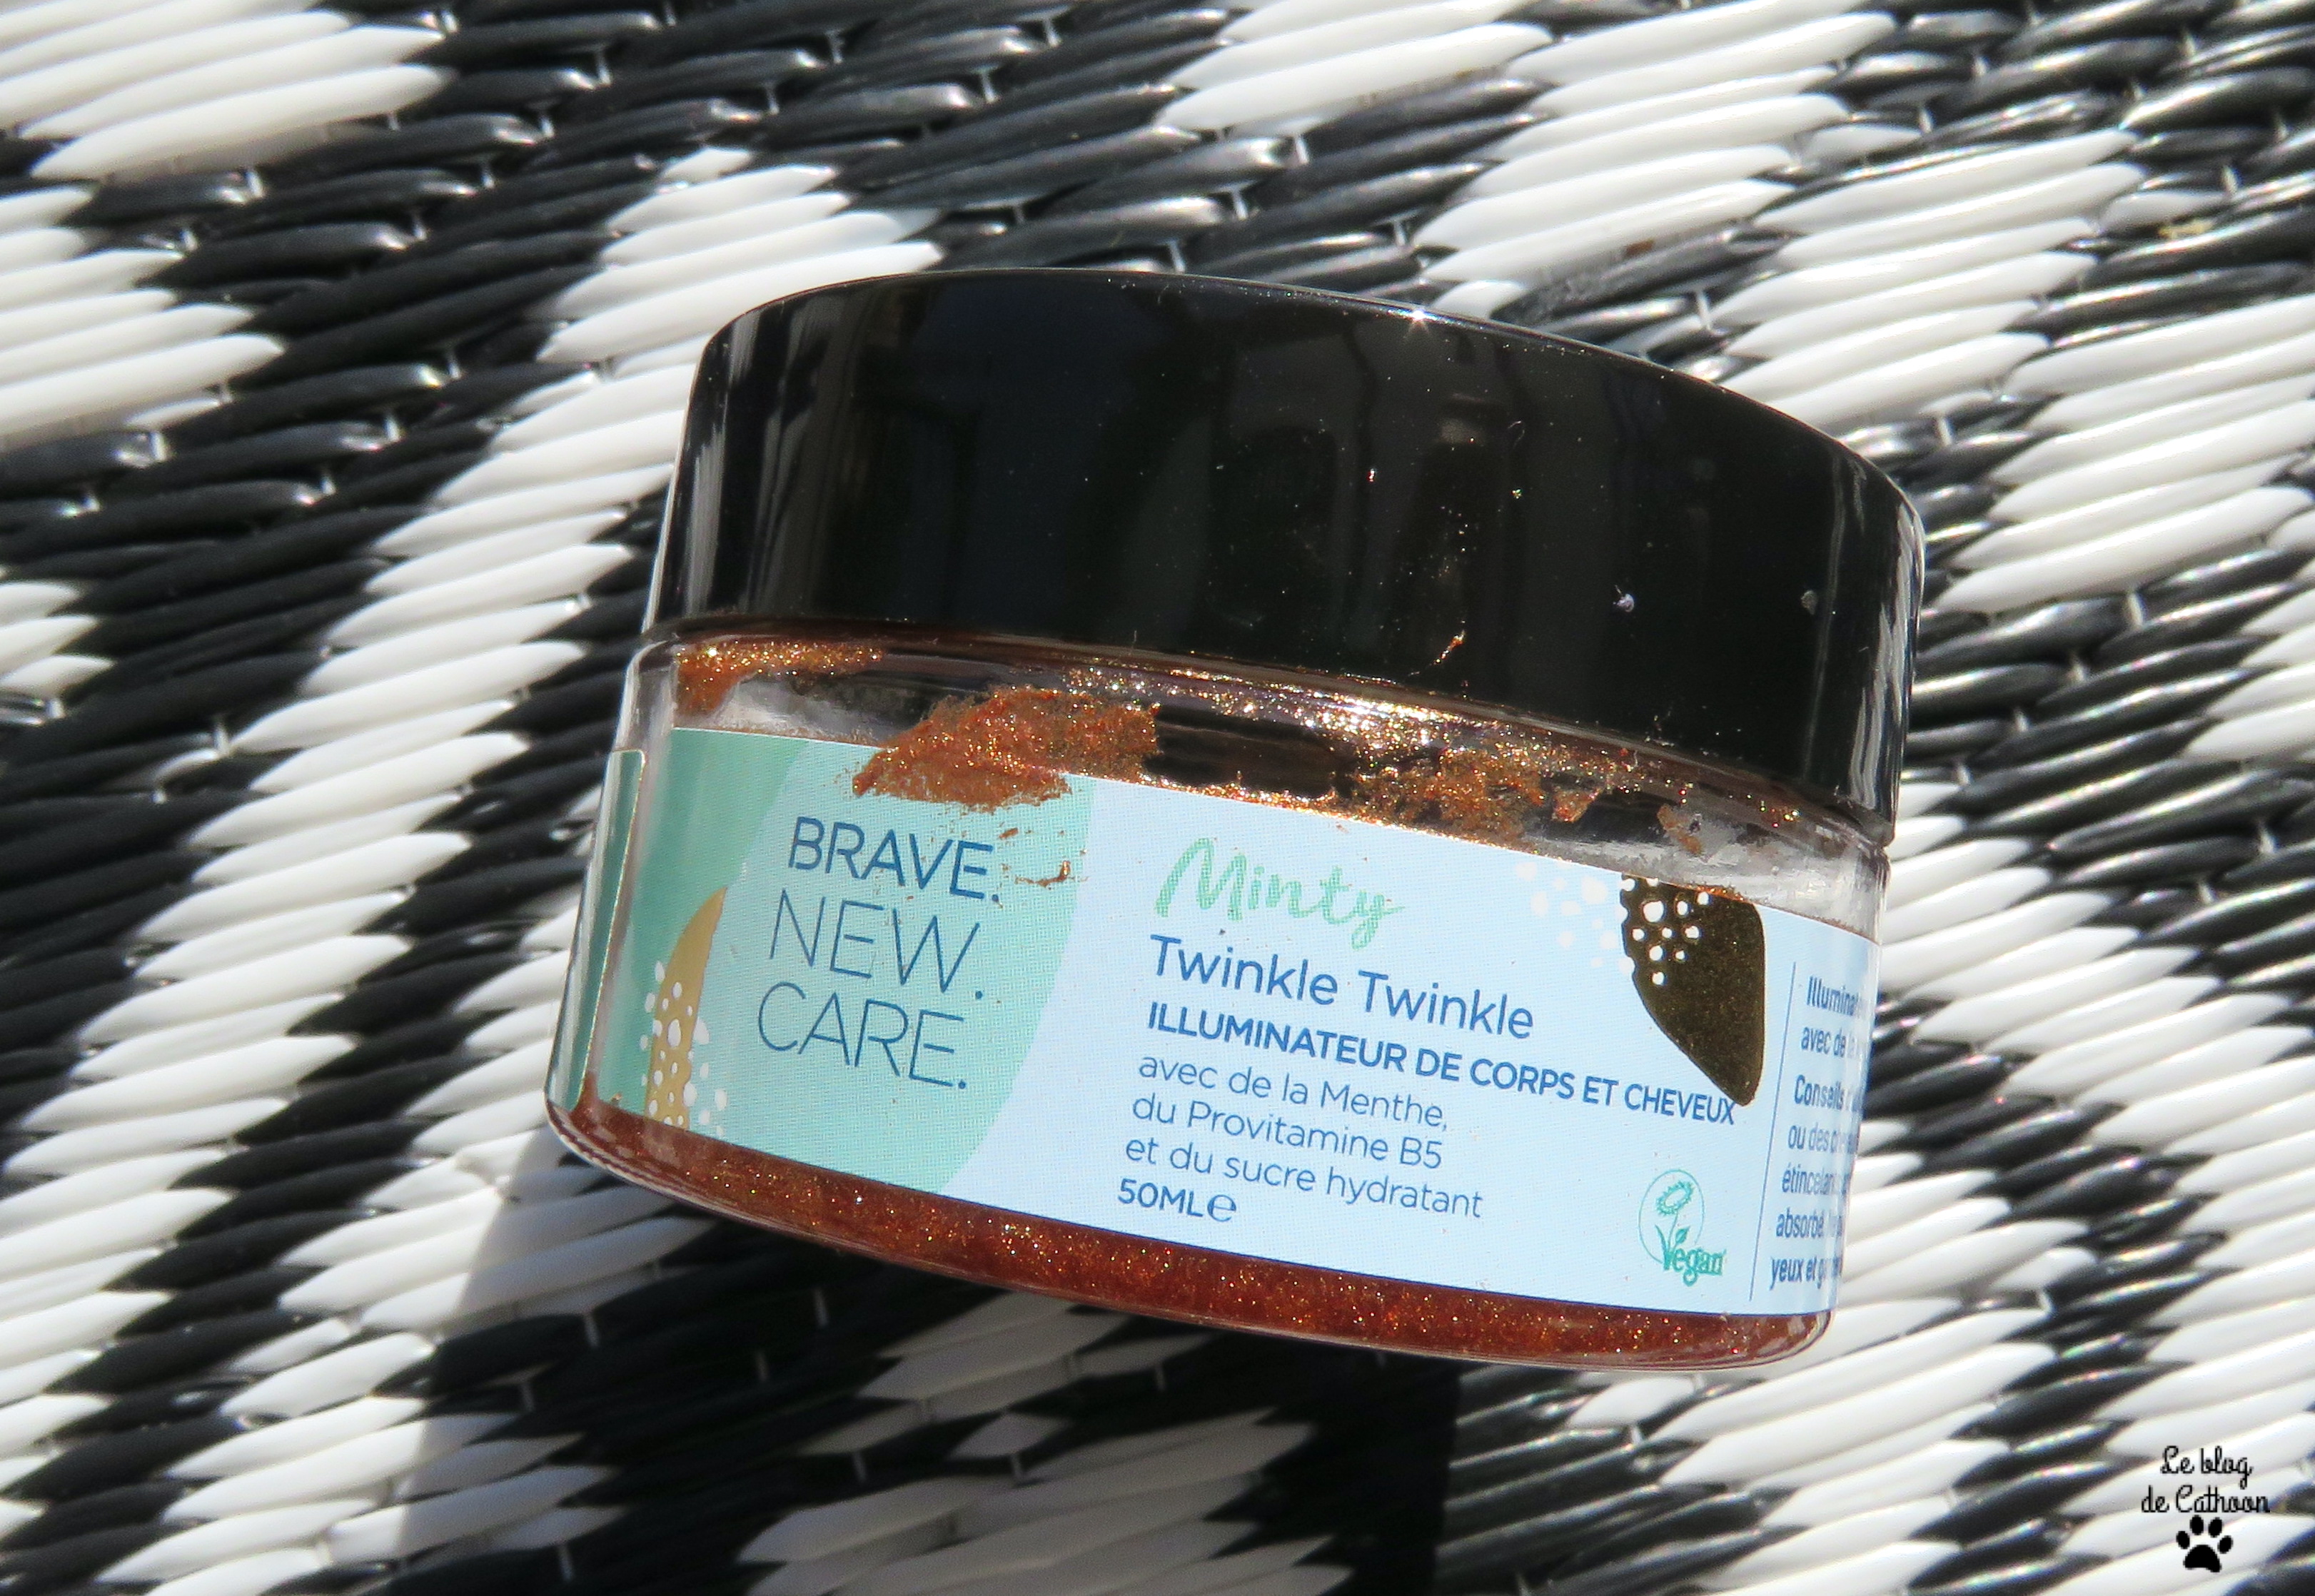 Twinkle Twinkle - Illuminateur Corps & Cheveux - Brave New Care